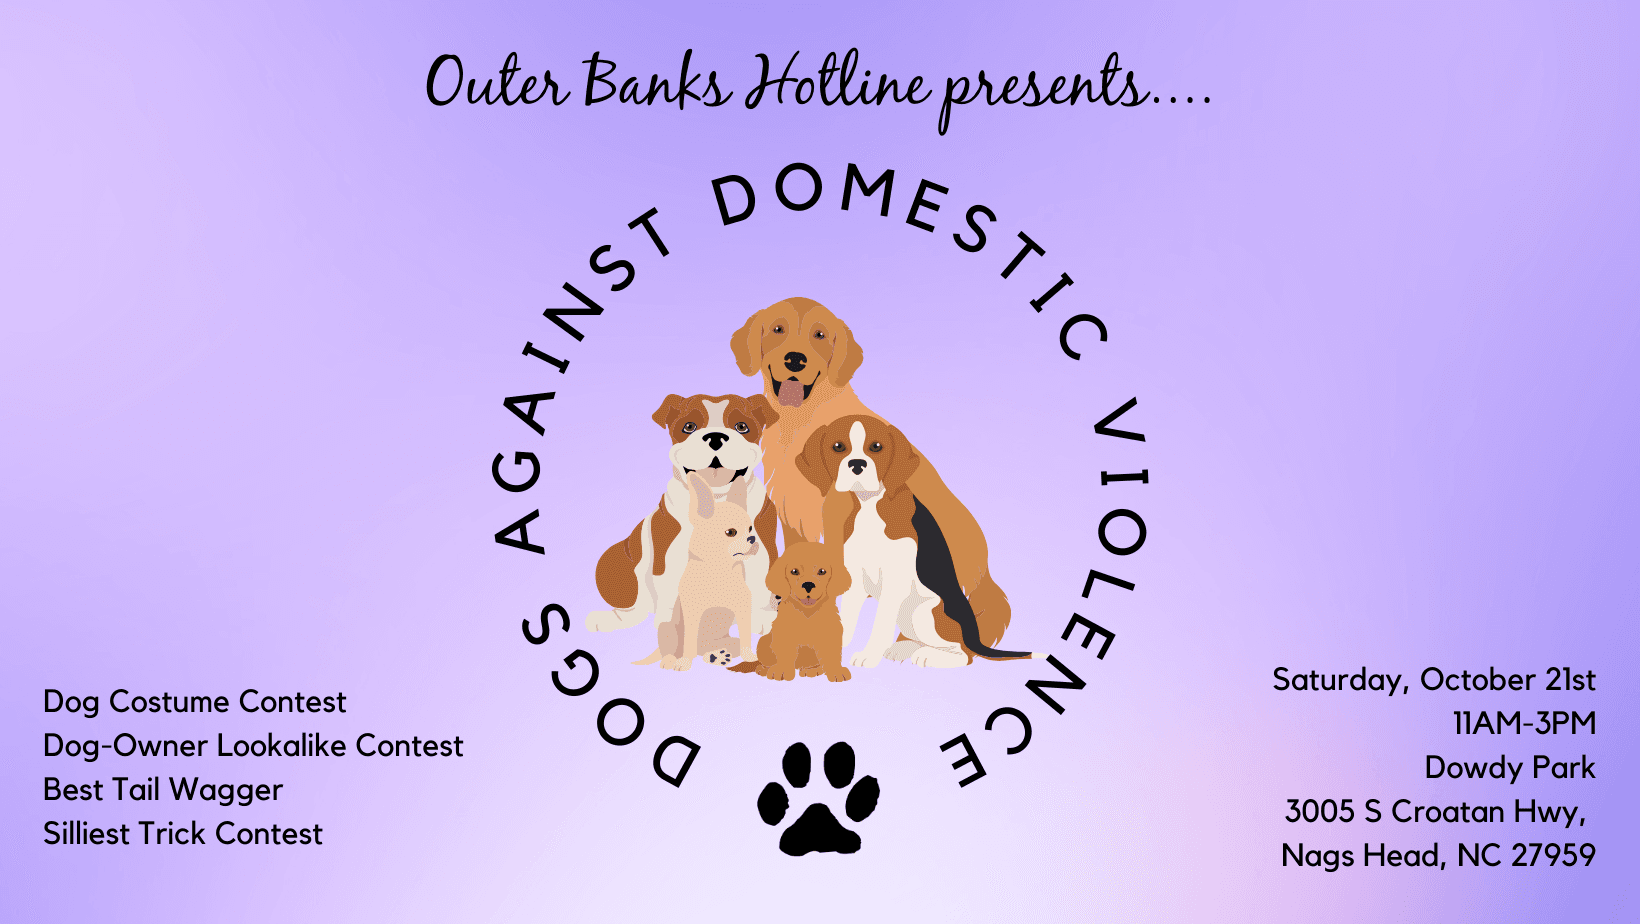 New Event - Dogs Against Domestic Violence!